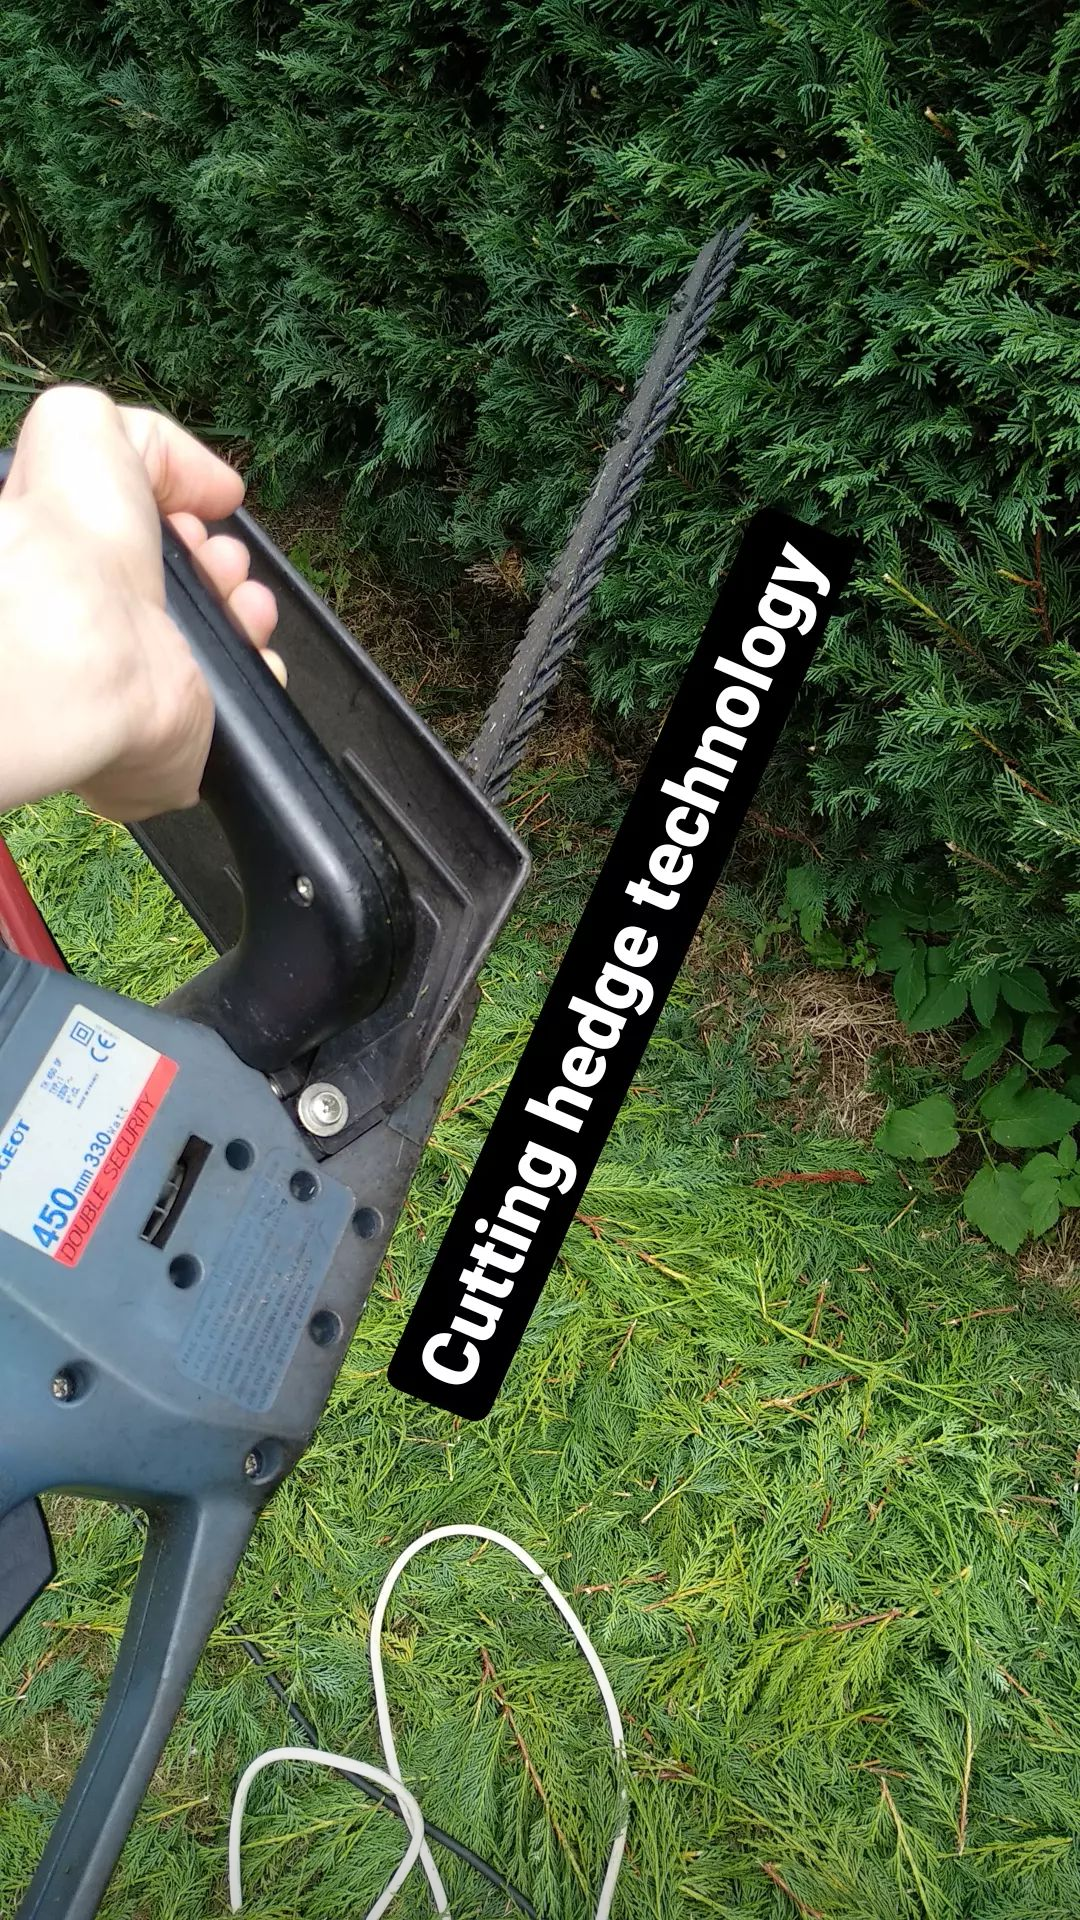 a picture of a hand holding a hedge trimmer and a caption that says "cutting hedge technology"